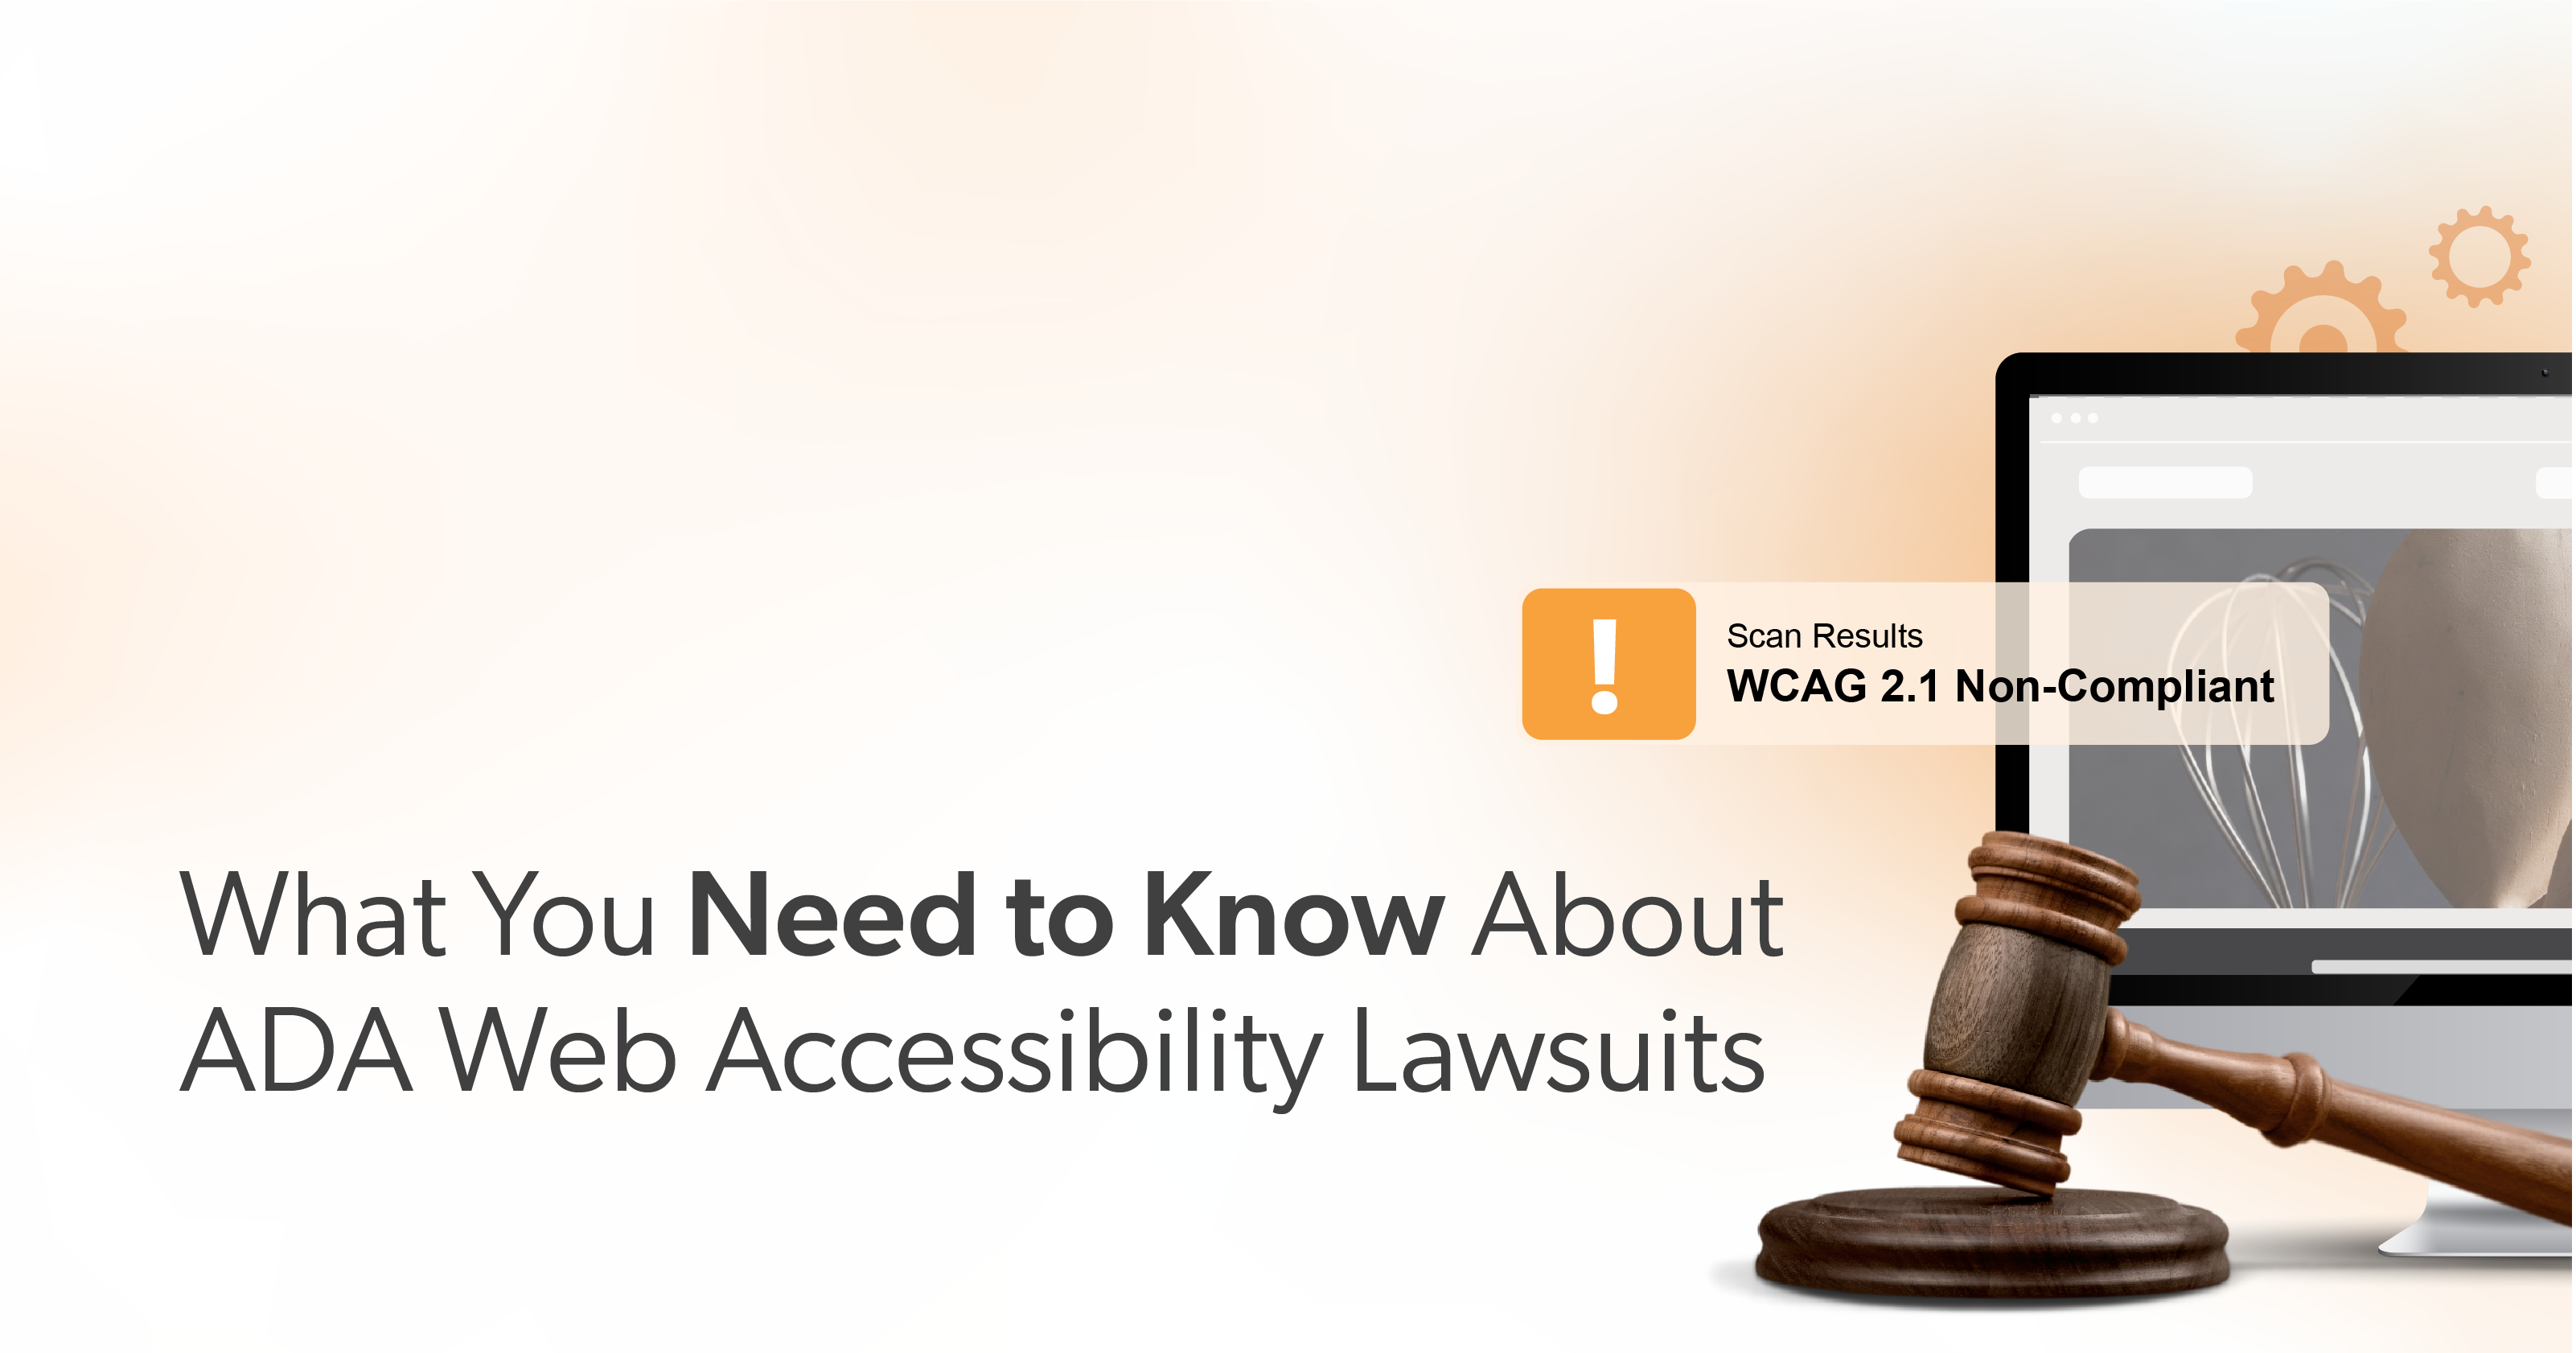 What You Need to Know About ADA Web Accessibility Lawsuits